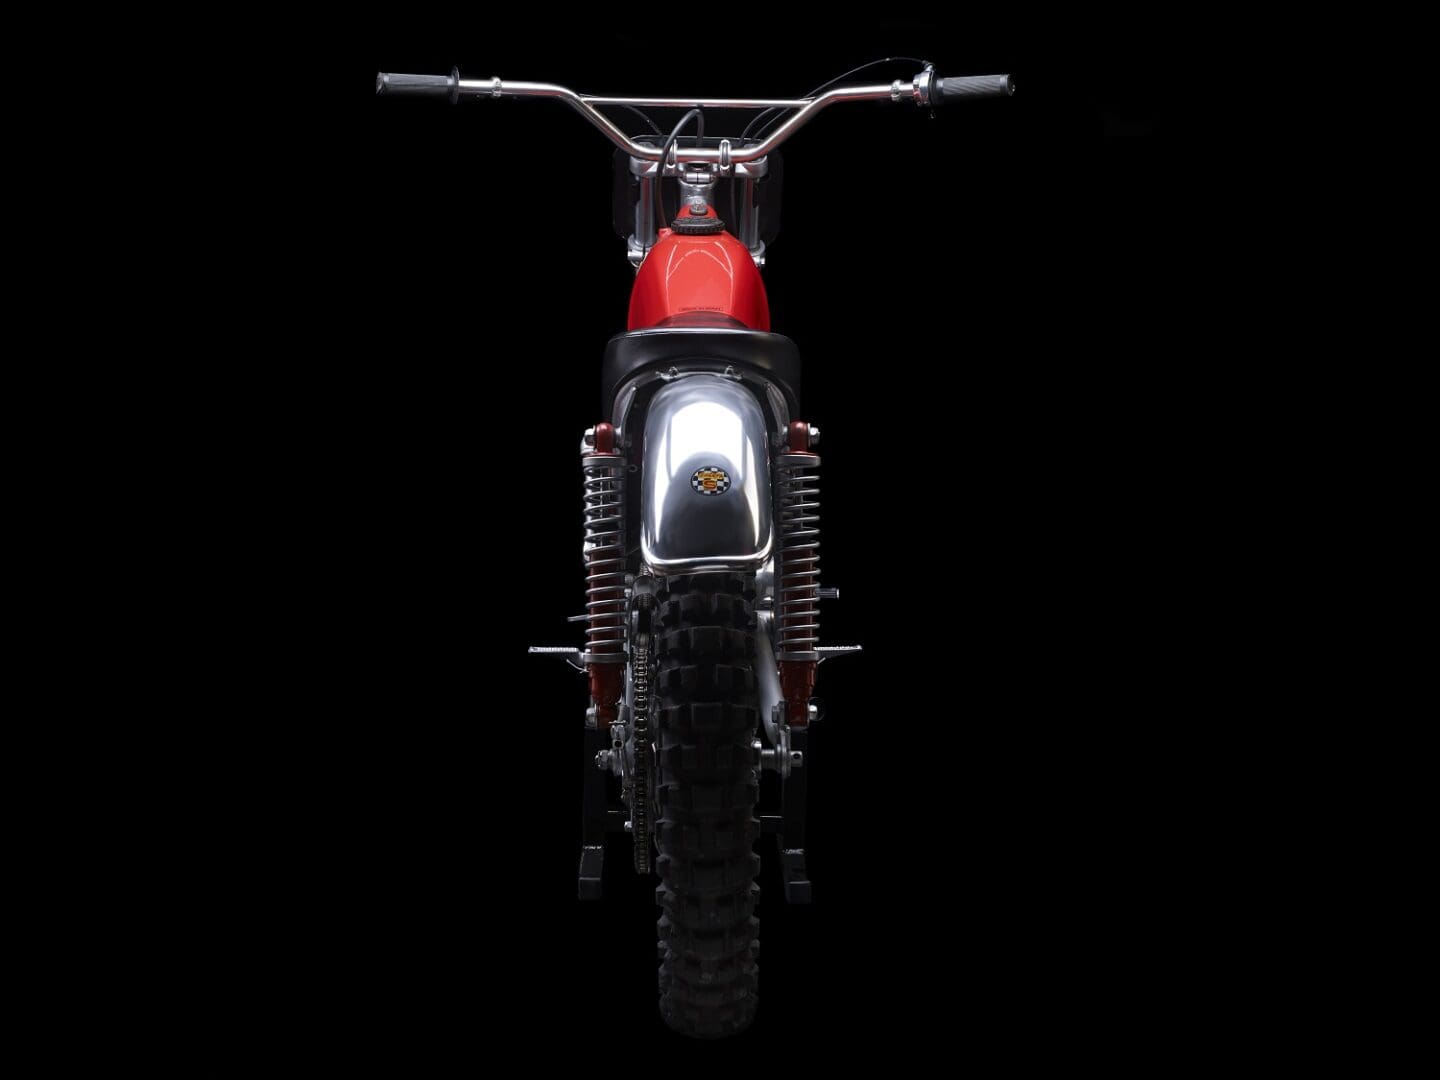 A red dirt bike on a black background.